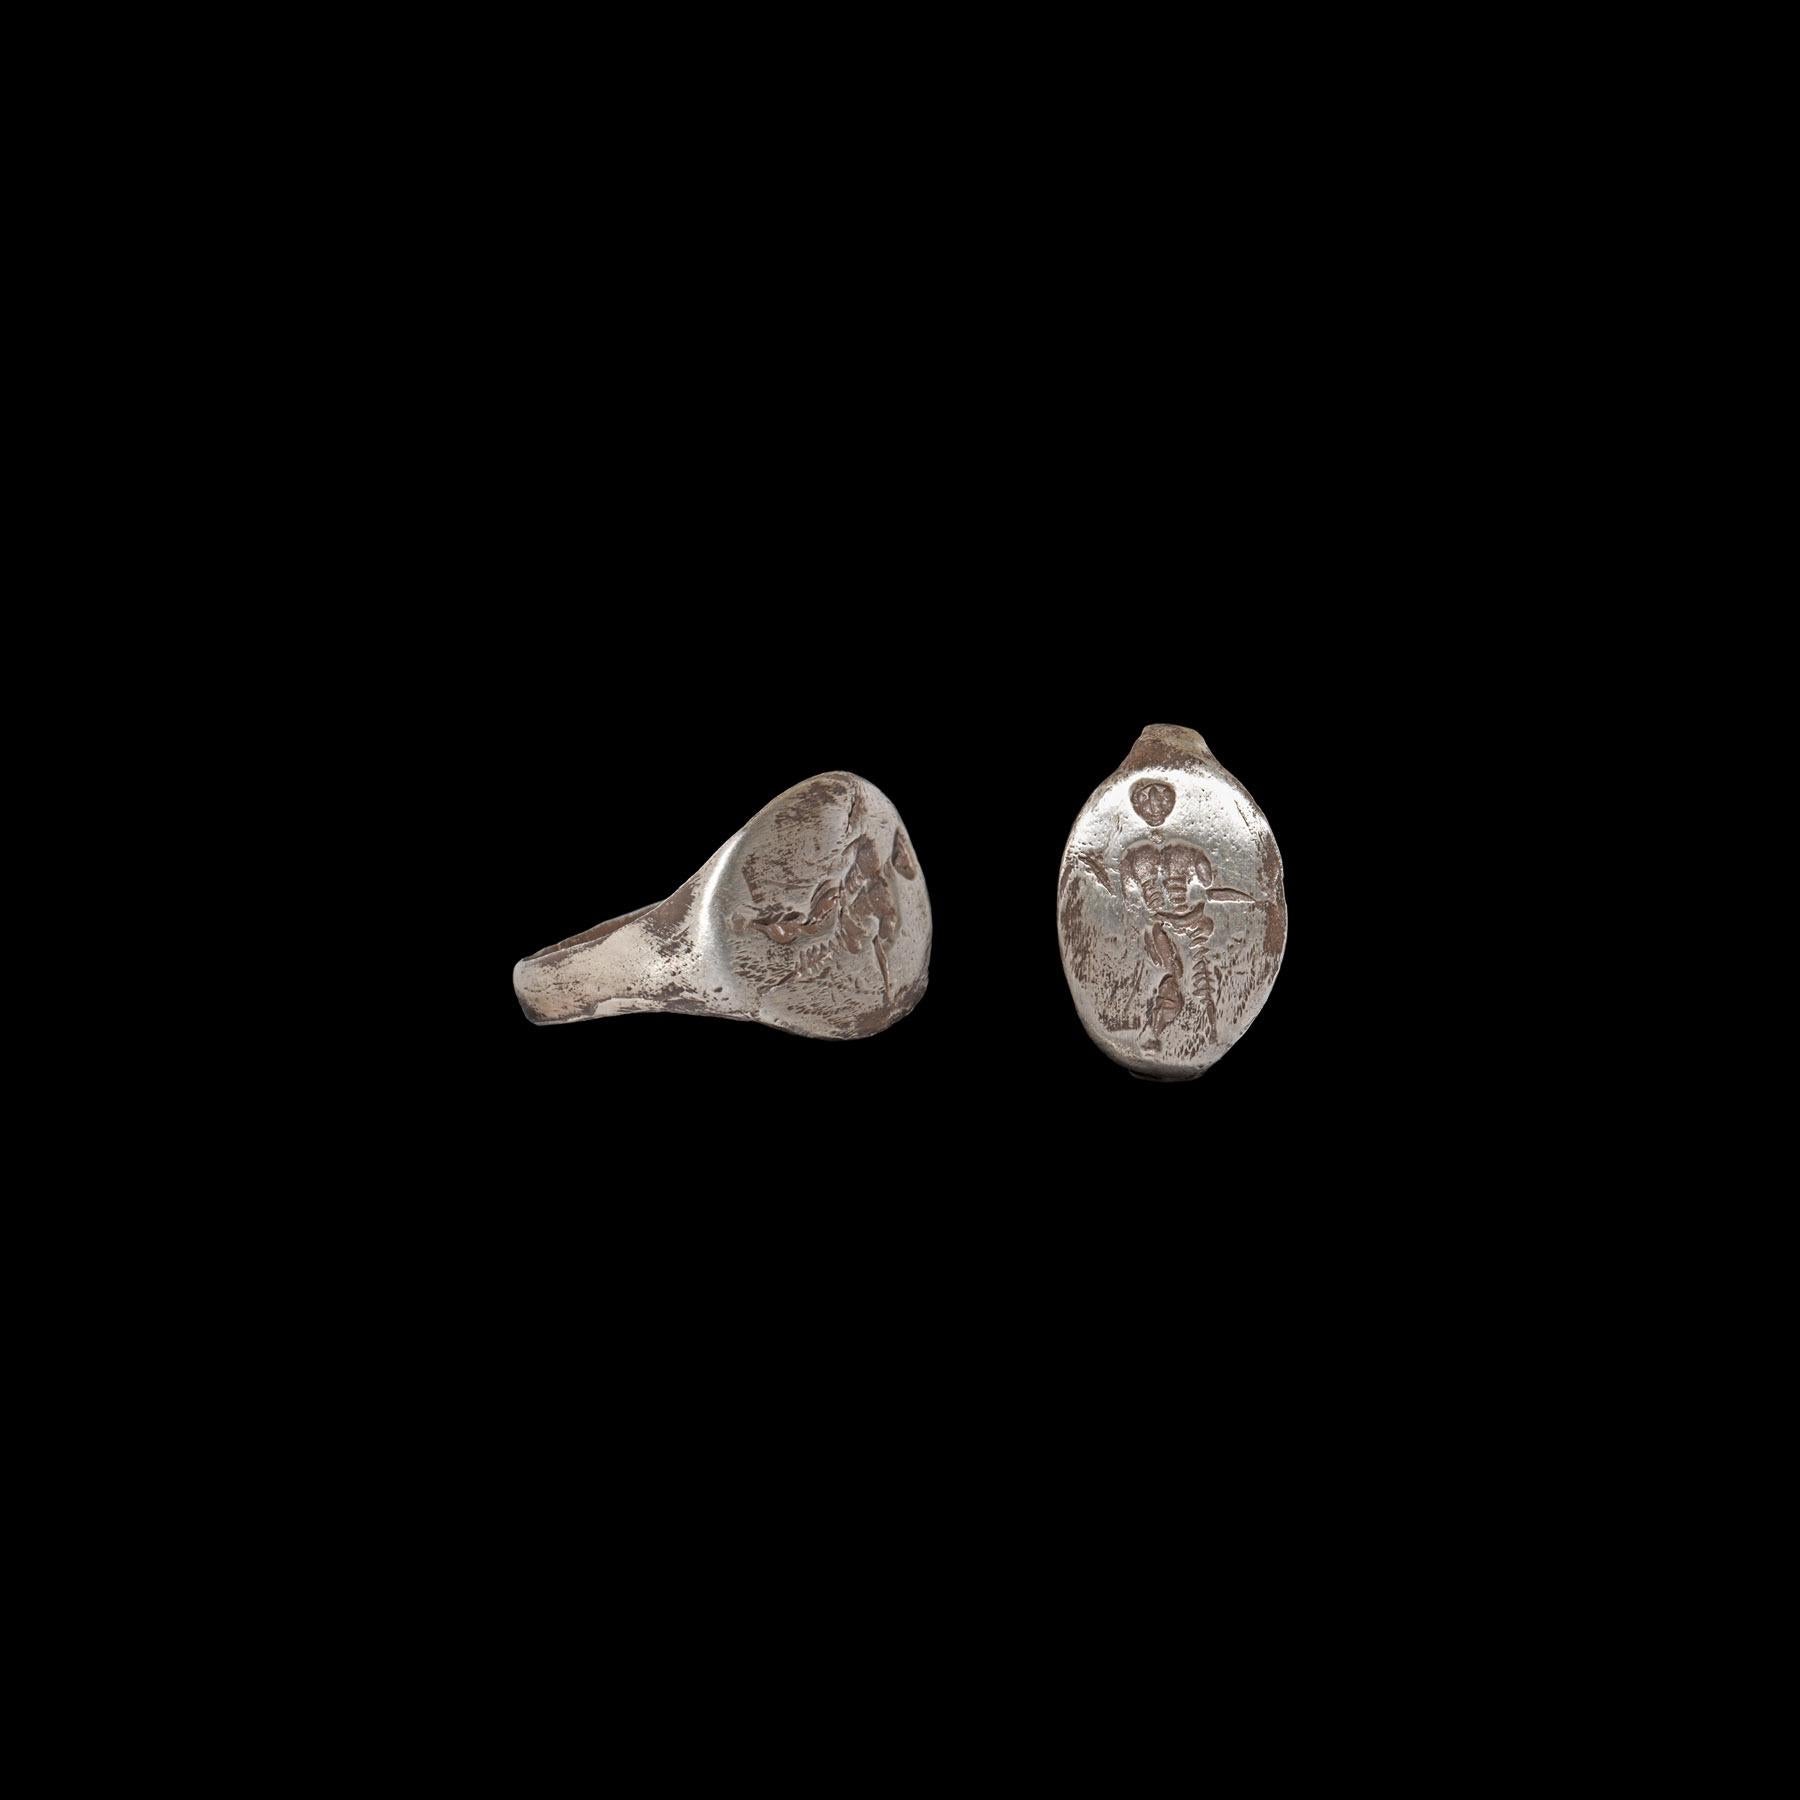 Hand-Crafted Thracian Silver Ring with a Nude Male Figure, 5th-3rd Century BC, Provenance